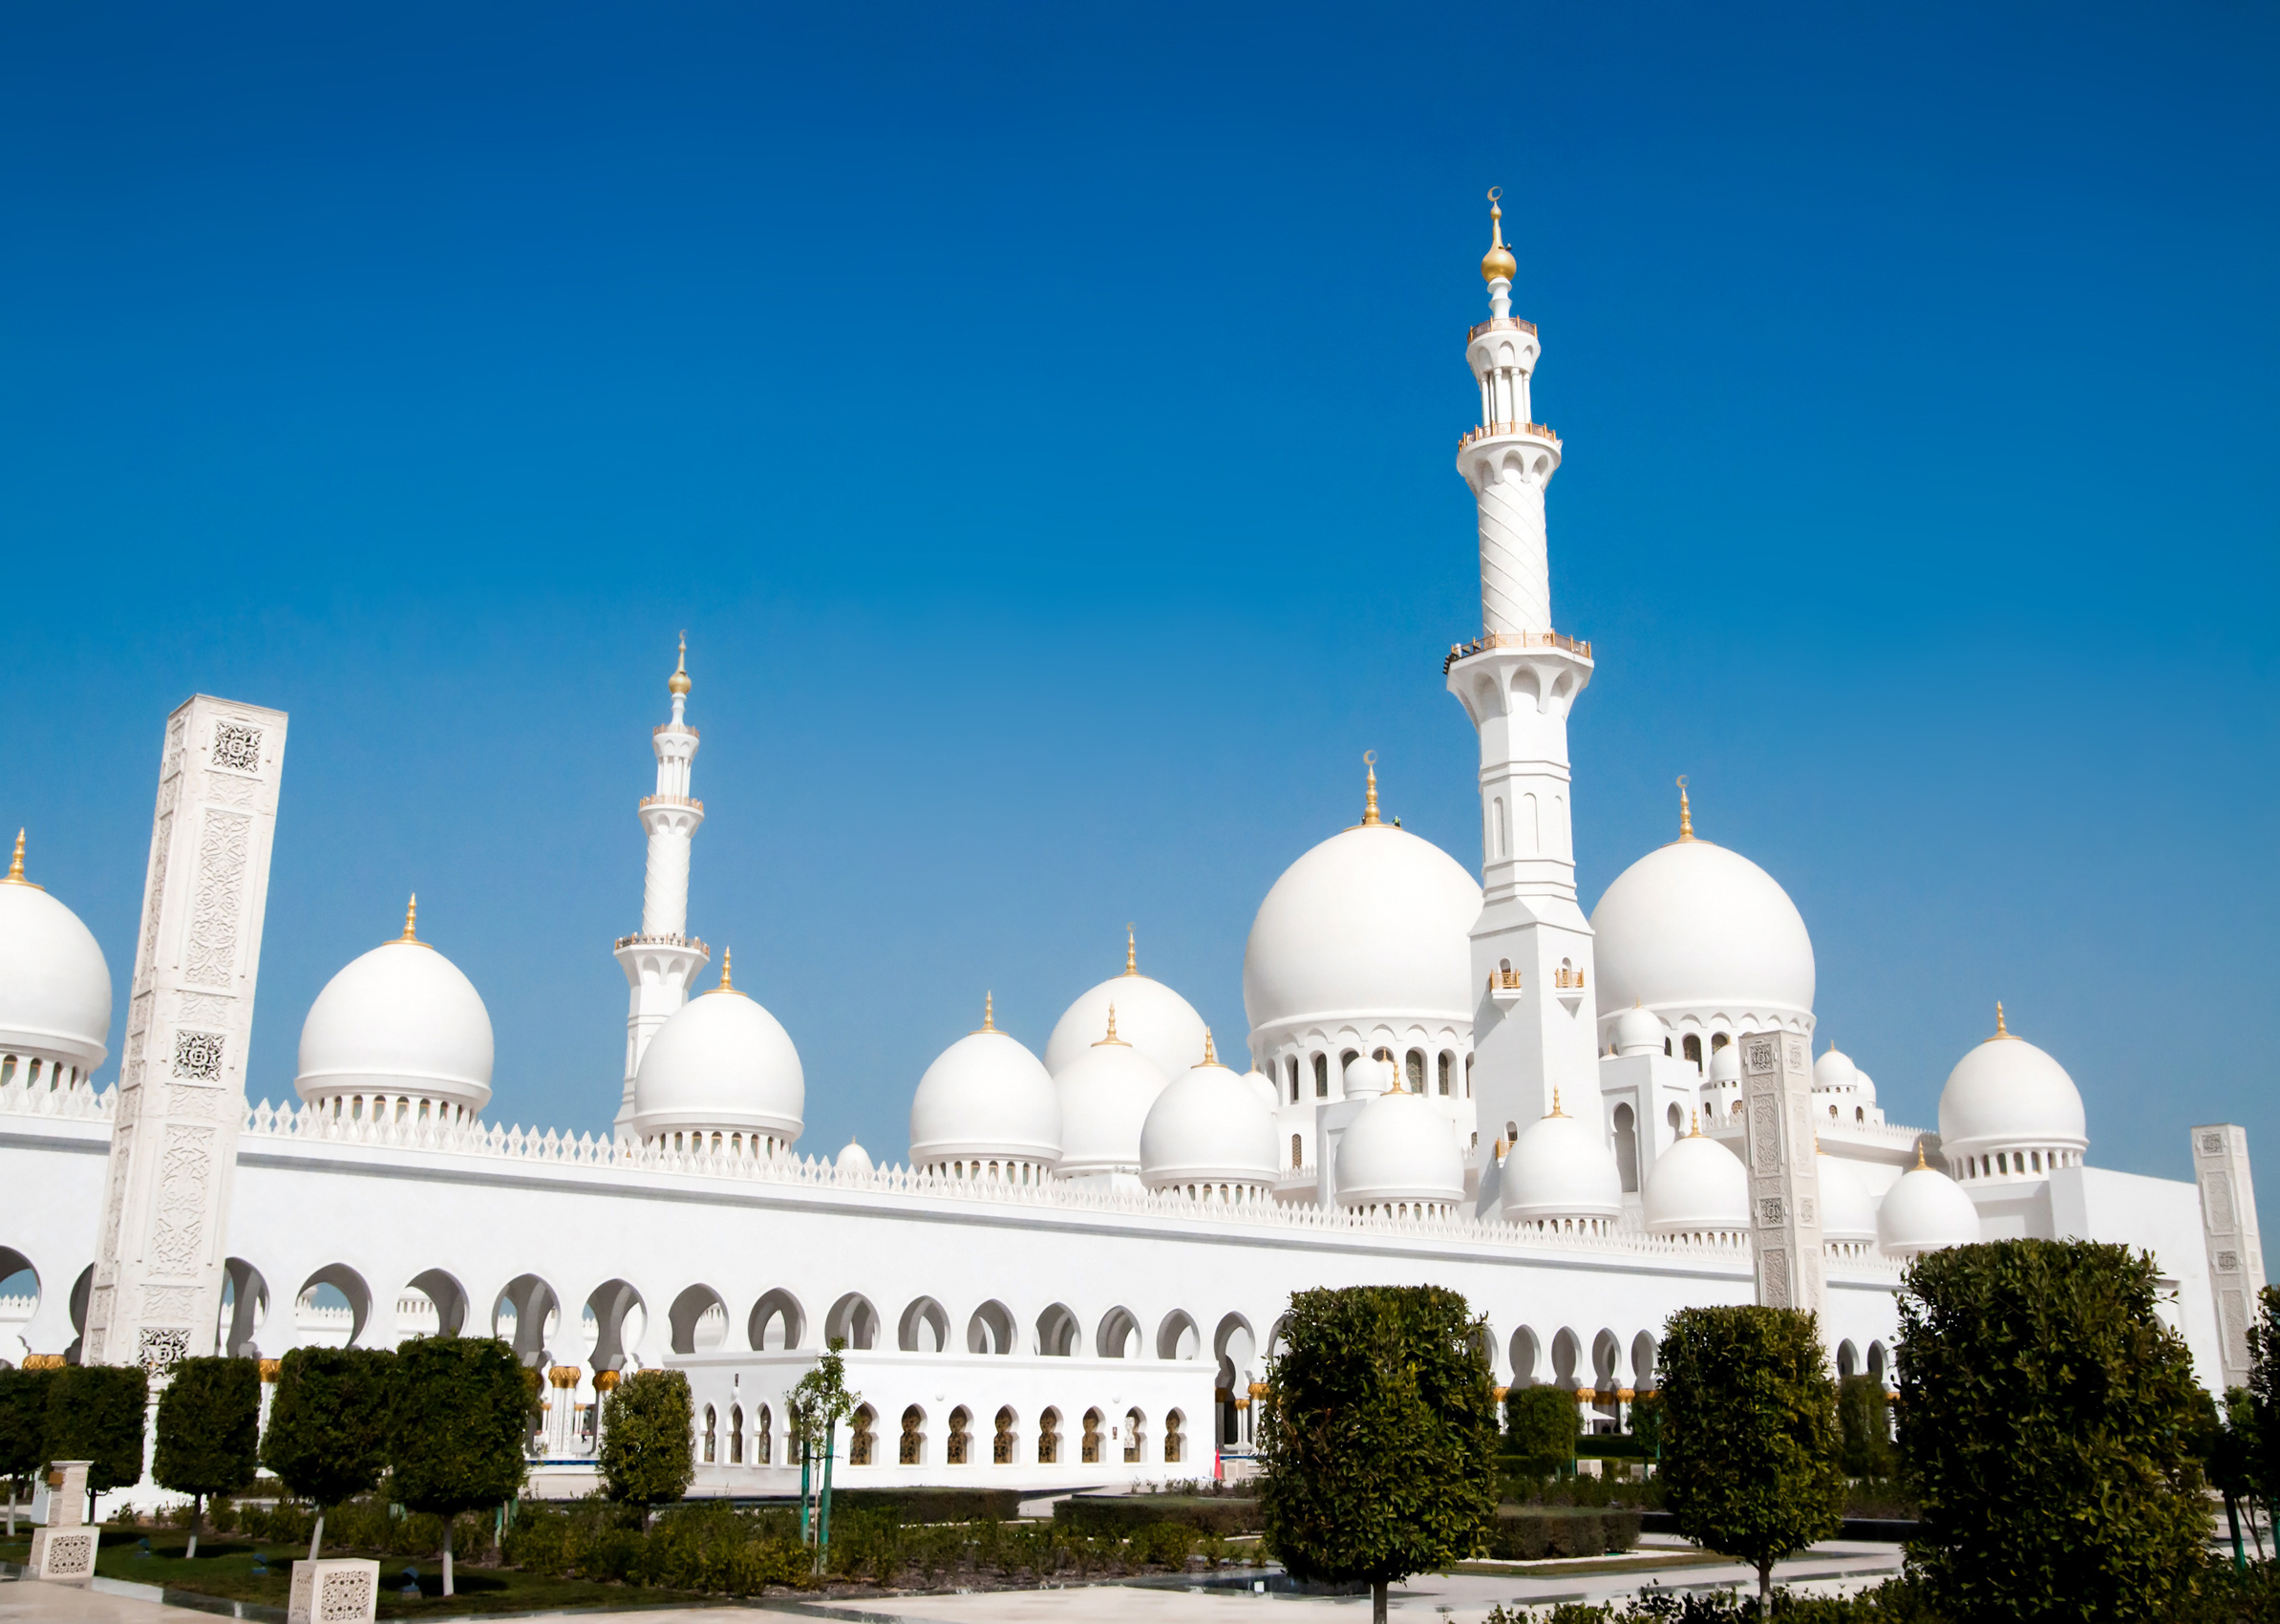 HD desktop wallpaper: Religious, Sheikh Zayed Grand Mosque, Mosques  download free picture #434721